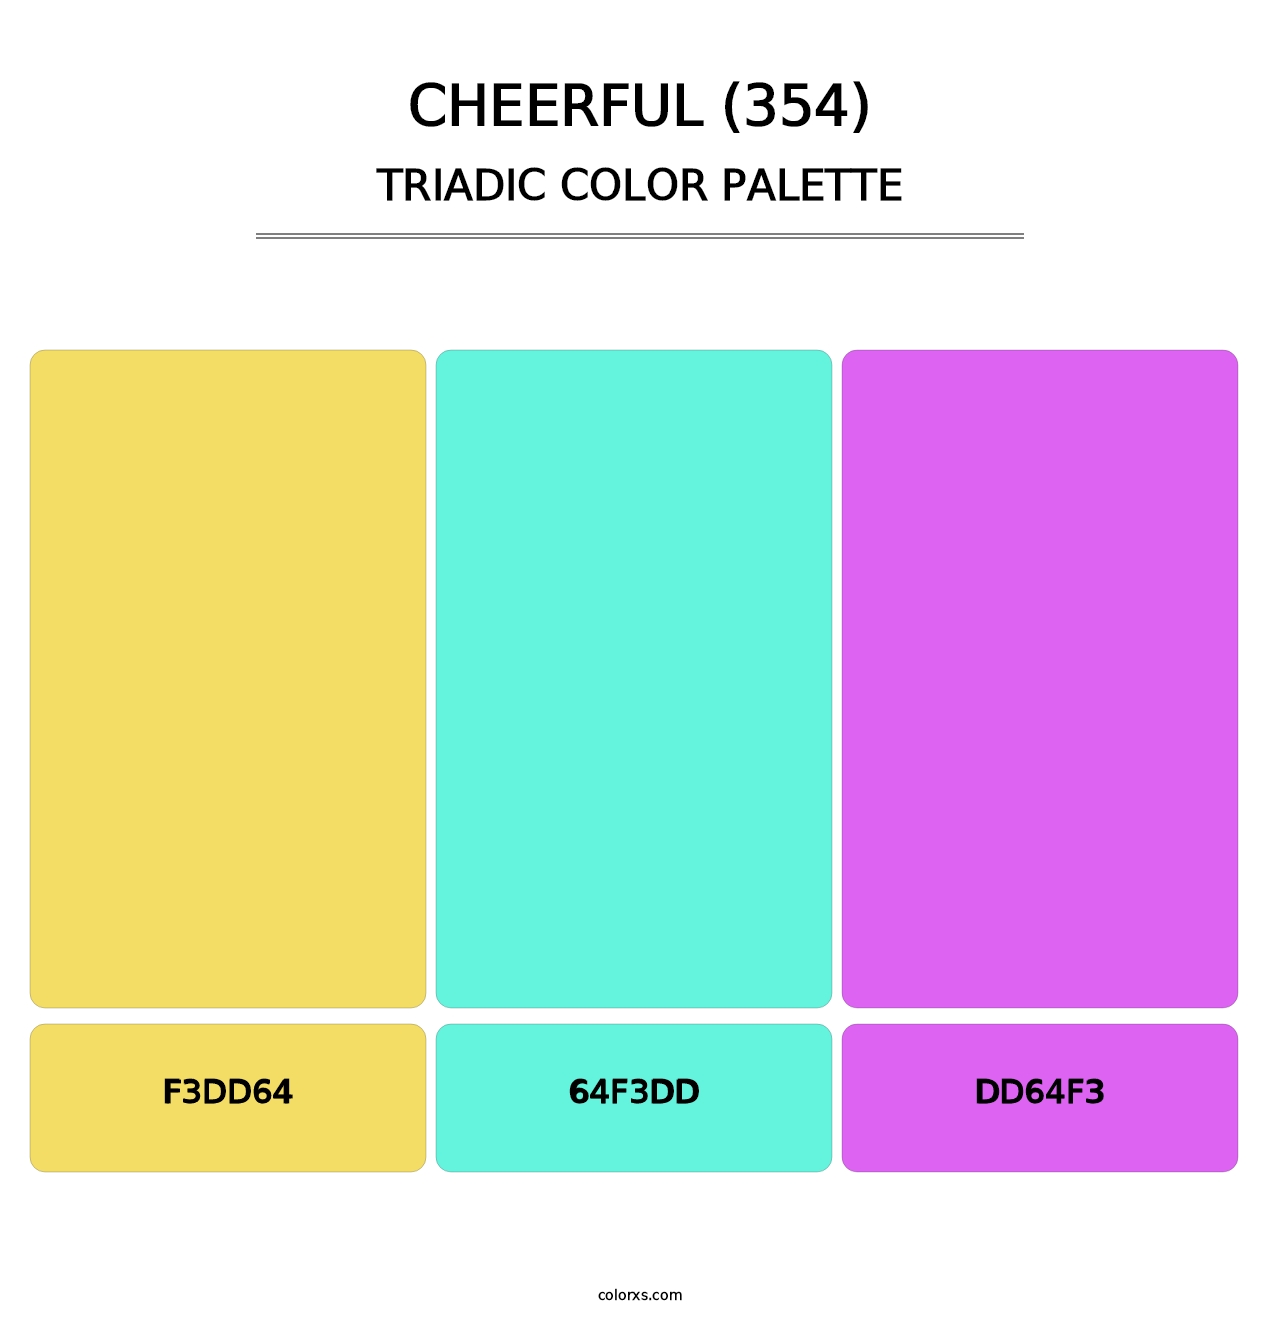 Cheerful (354) - Triadic Color Palette